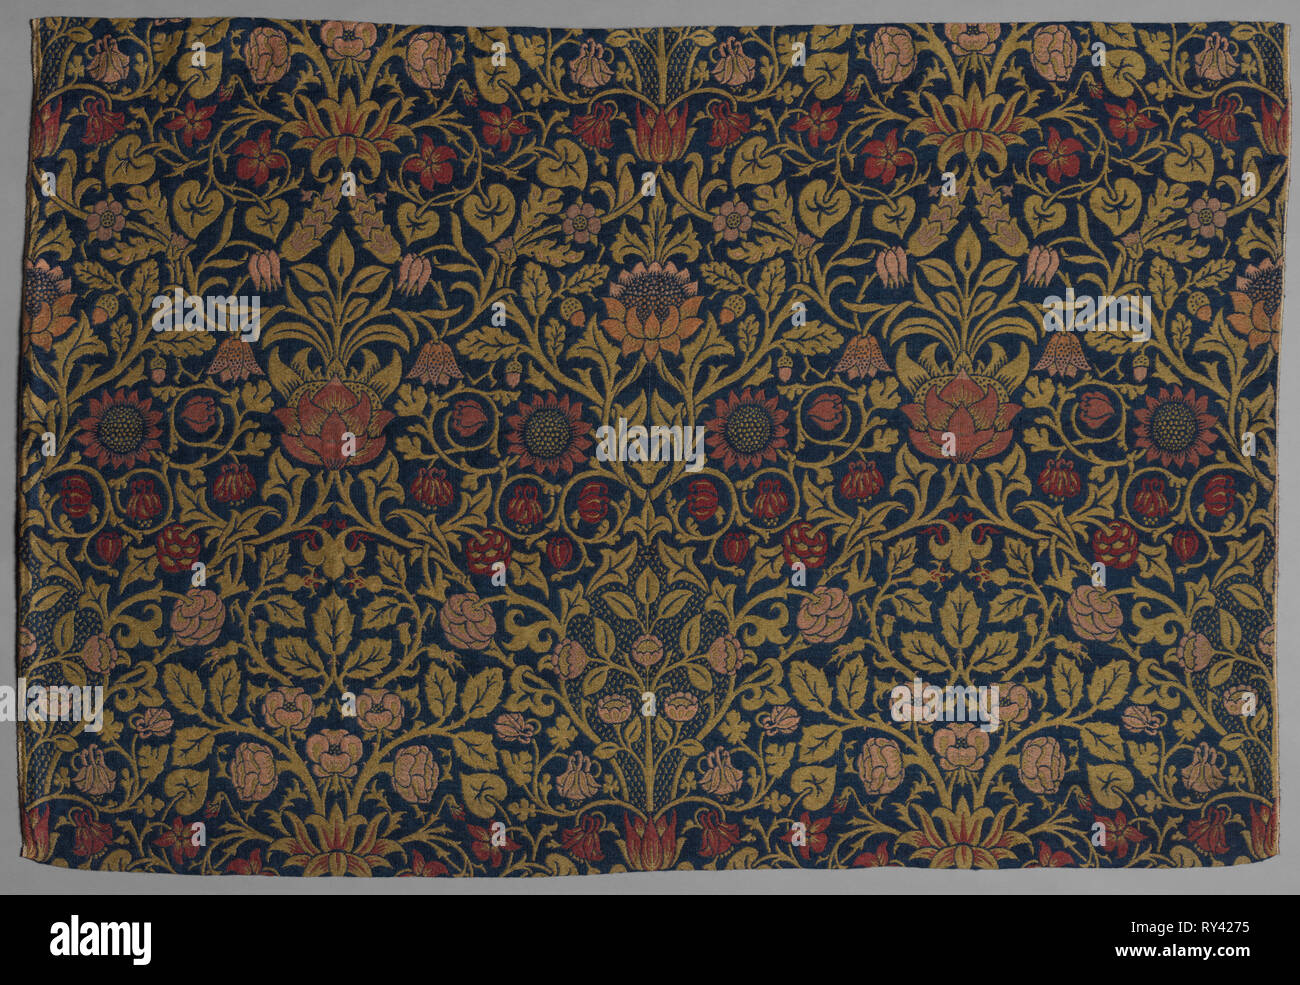 Violet and Columbine, 1883. William Morris (British, 1834-1896). Jacquard loom woven weft-faced twill, double cloth; wool and mohair; overall: 122.6 x 180.7 cm (48 1/4 x 71 1/8 in Stock Photo